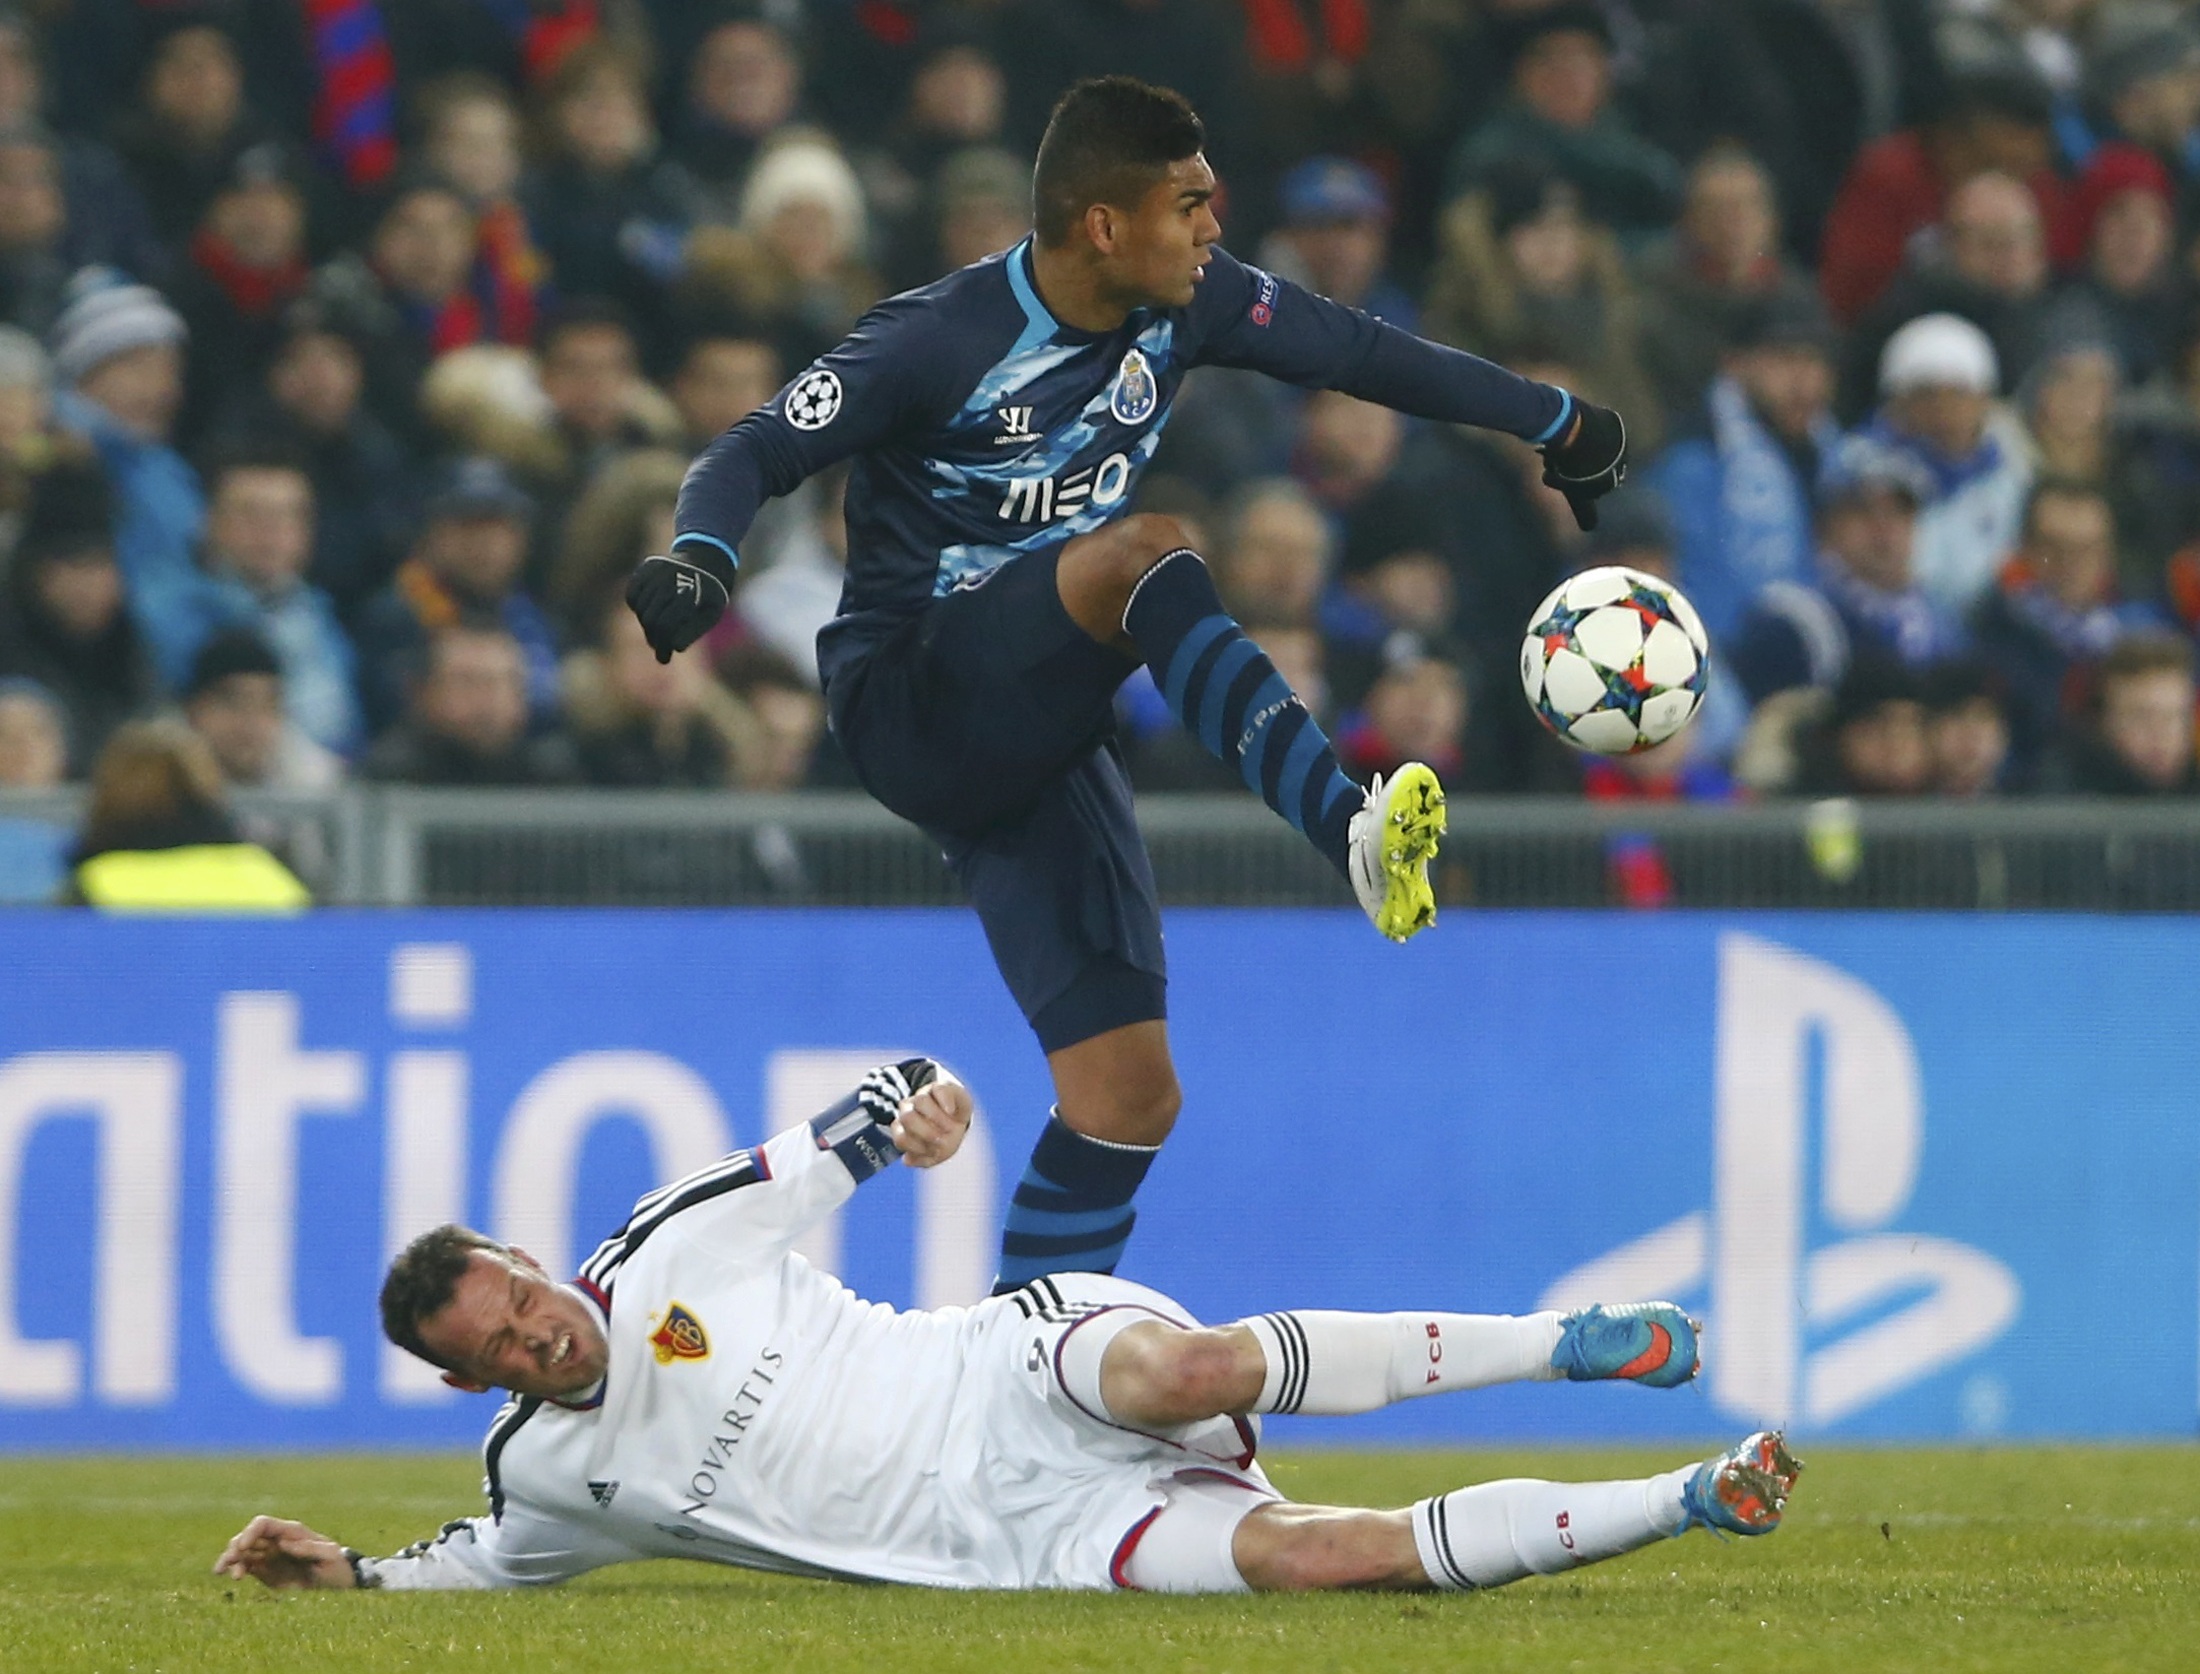 Porto's Casemiro (R) kicks the ball over FC Basel's Marco Streller during their Champions League round of 16 first leg soccer match in Basel, February 18, 2015. REUTERS/Arnd Wiegmann (SWITZERLAND - Tags: SOCCER SPORT)